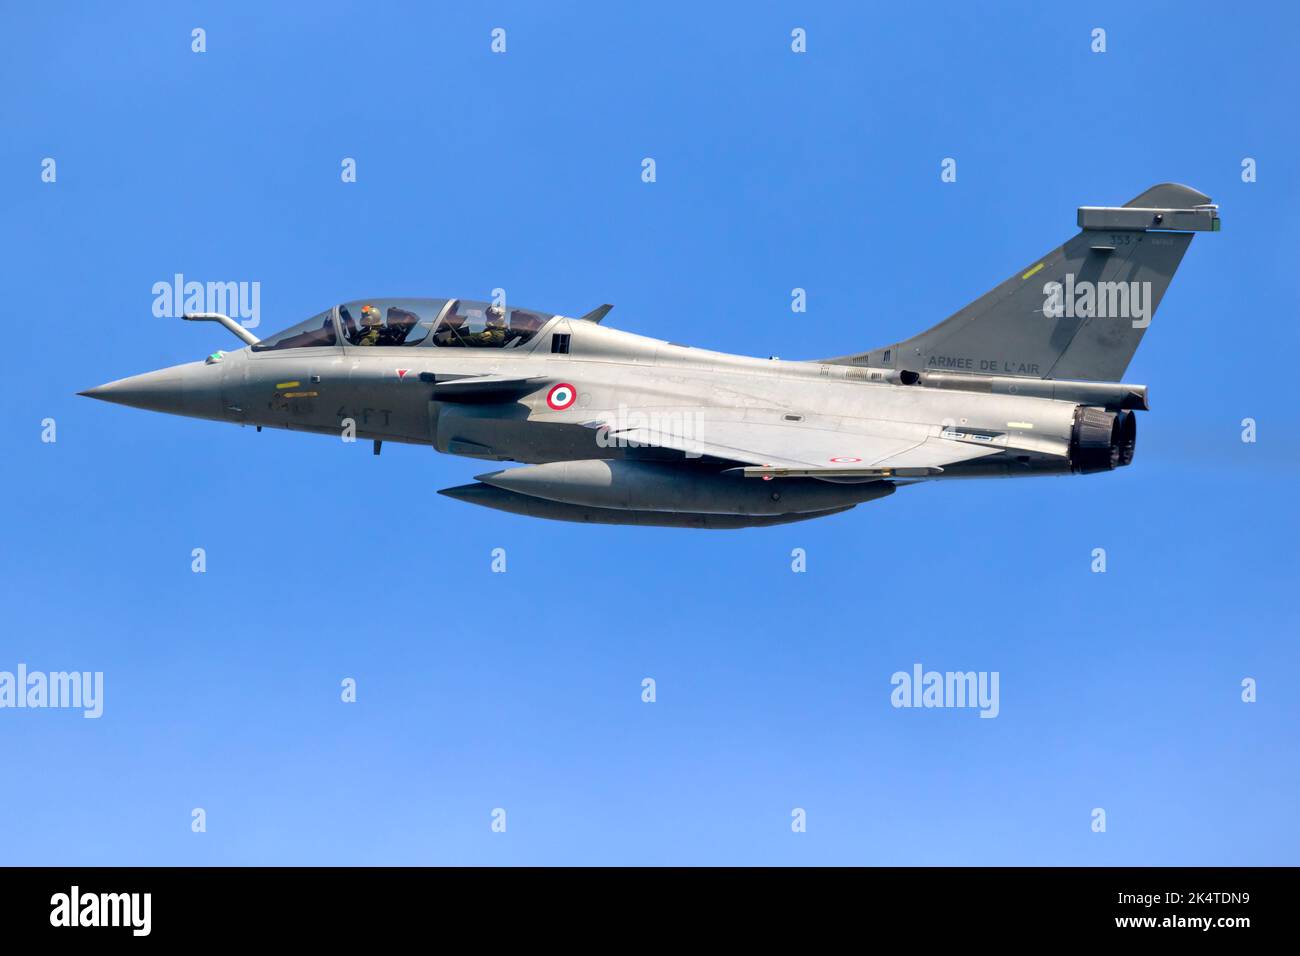 French Air Force Dassault Rafale fighter jet in flight. The Netherlands - April 19, 2018 Stock Photo